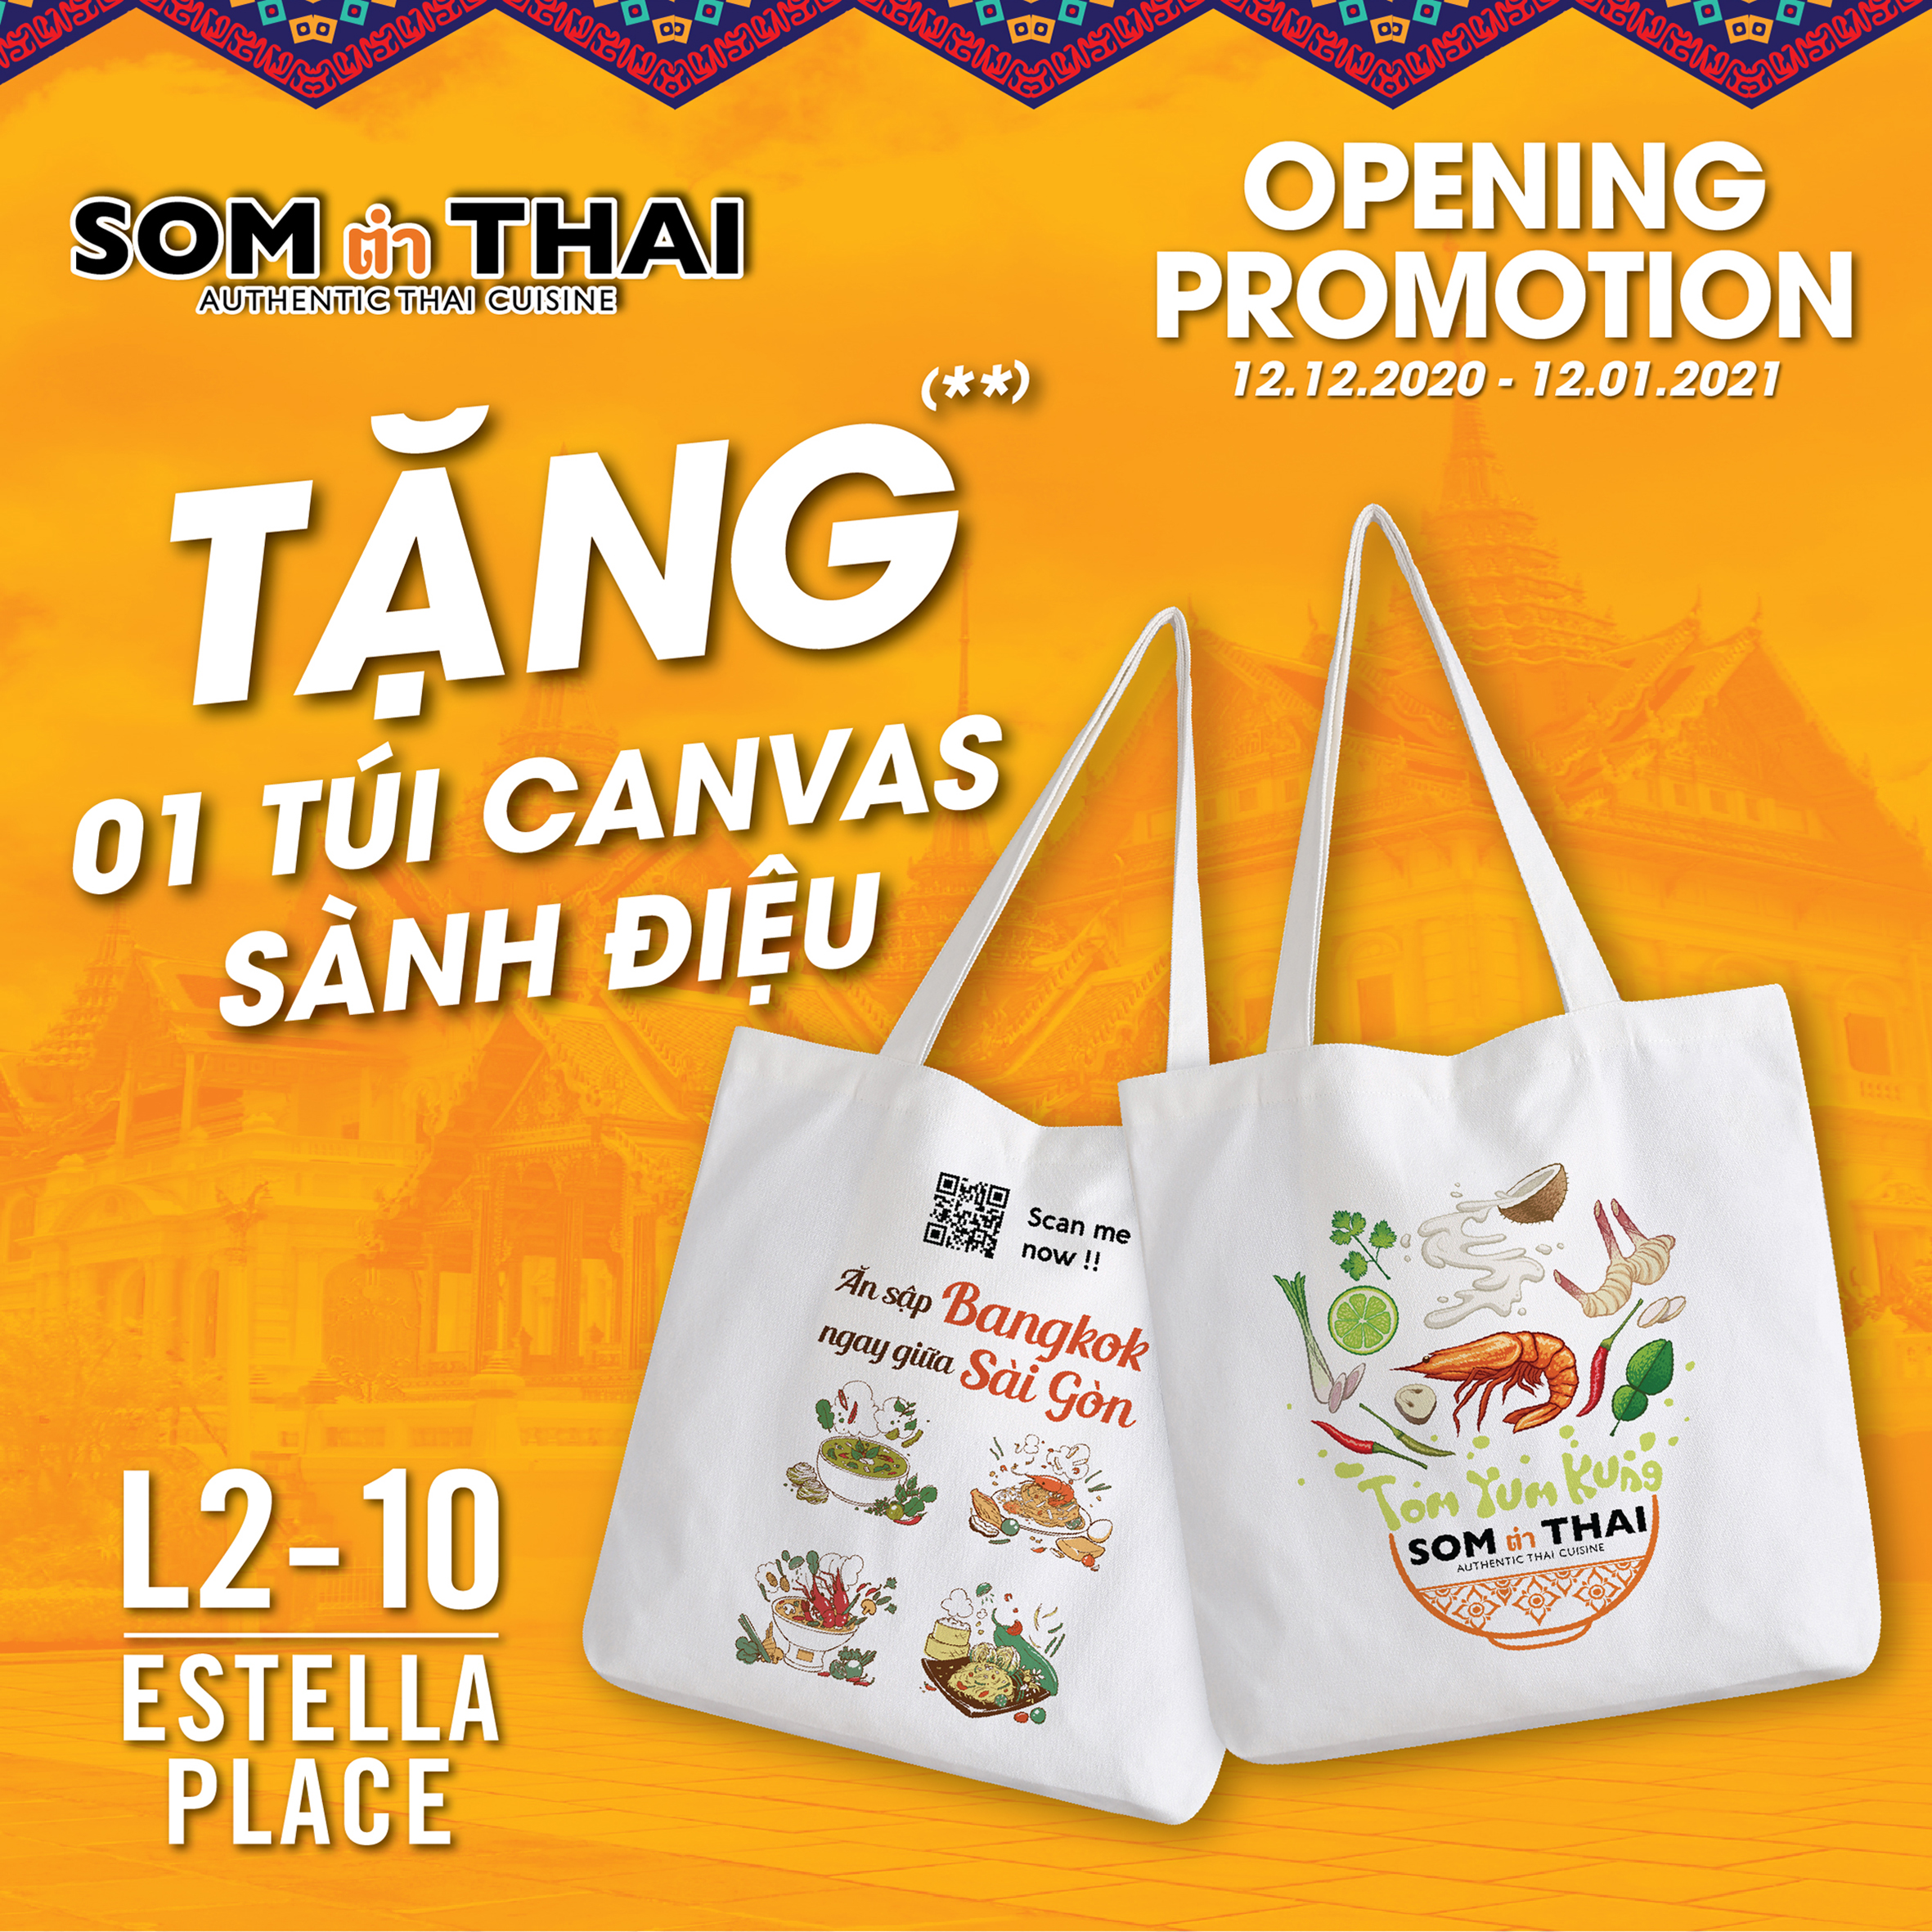 GRAND OPENING SOM ตำ THAI – ESTELLA PLACE IS OFFICIALLY OPENED IN 12.12.2020